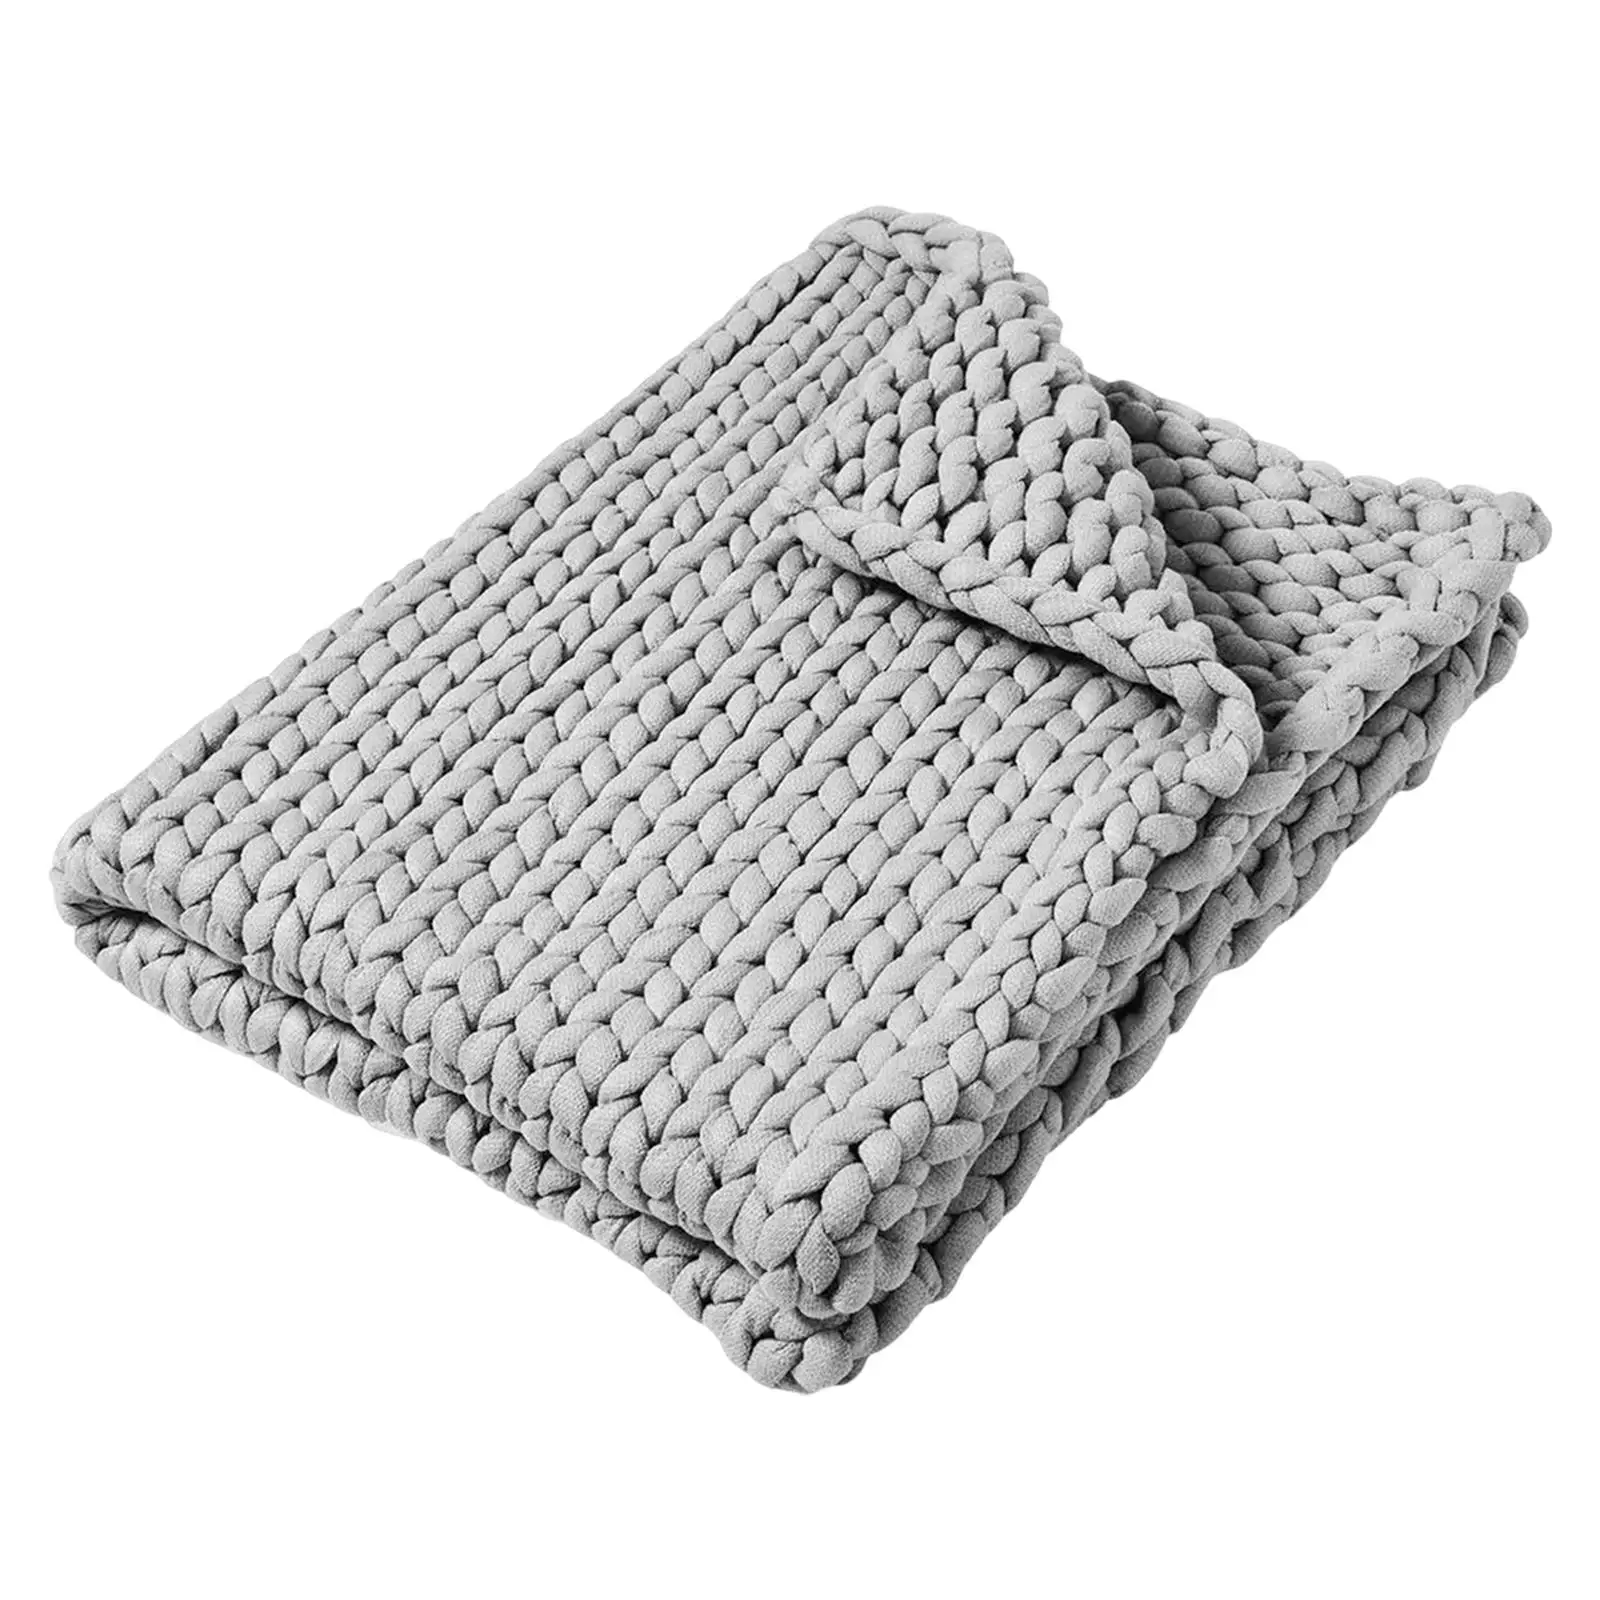 Handmade Chunky Knit Blanket Warm Knitted Blanket Throw Blanket Thick Blanket for Bedroom Couch Indoor Sofa Decor